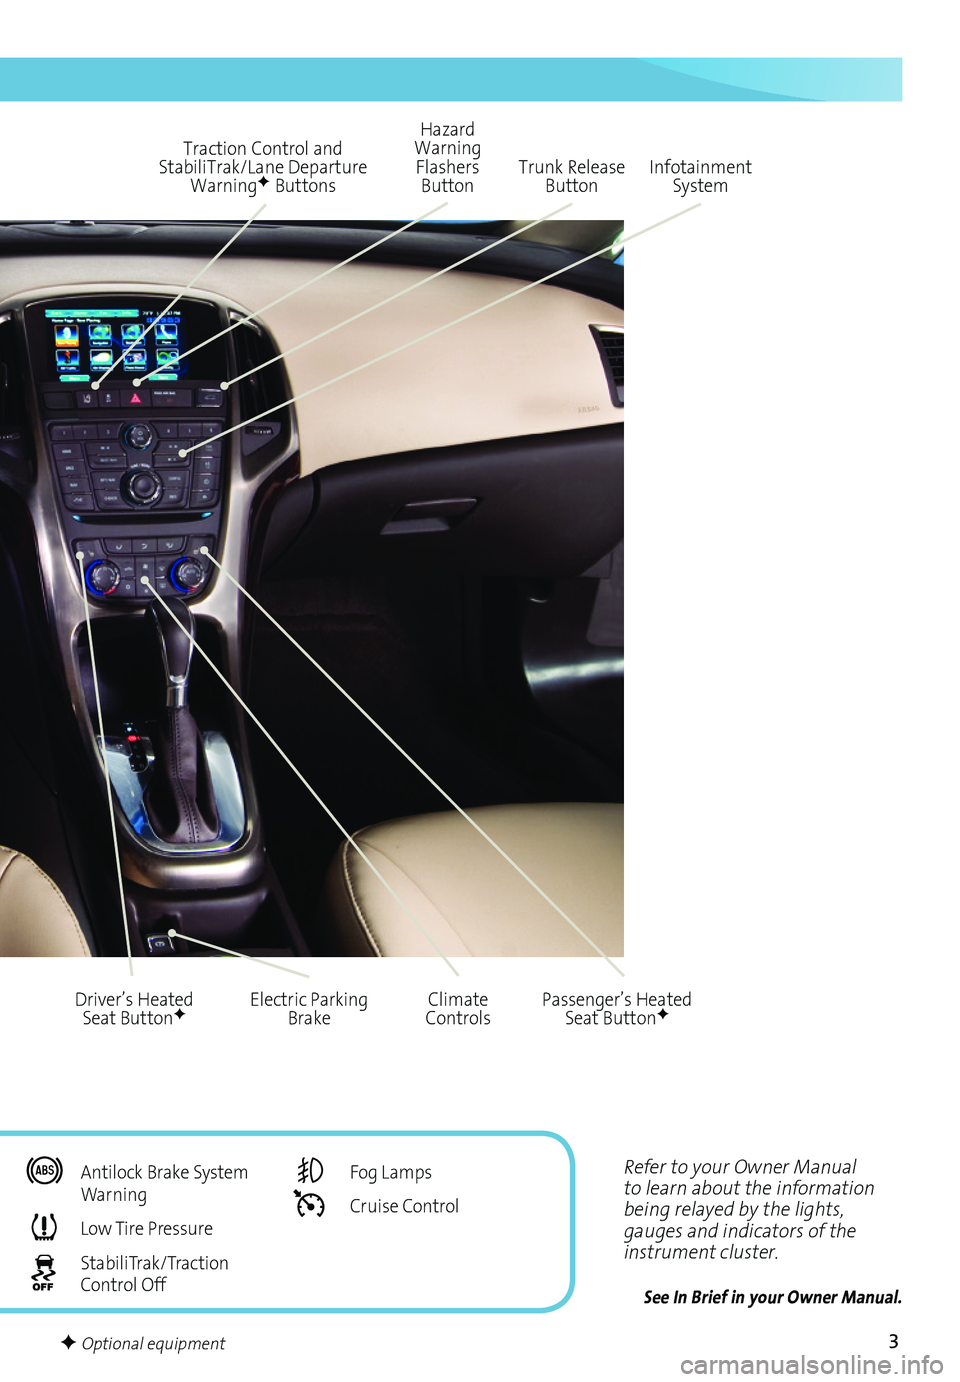 BUICK VERANO 2016  Get To Know Guide 3
Refer to your Owner Manual to learn about the information being relayed by the lights, gauges and indicators of the instrument cluster.
See In Brief in your Owner Manual.
Traction Control and Stabil